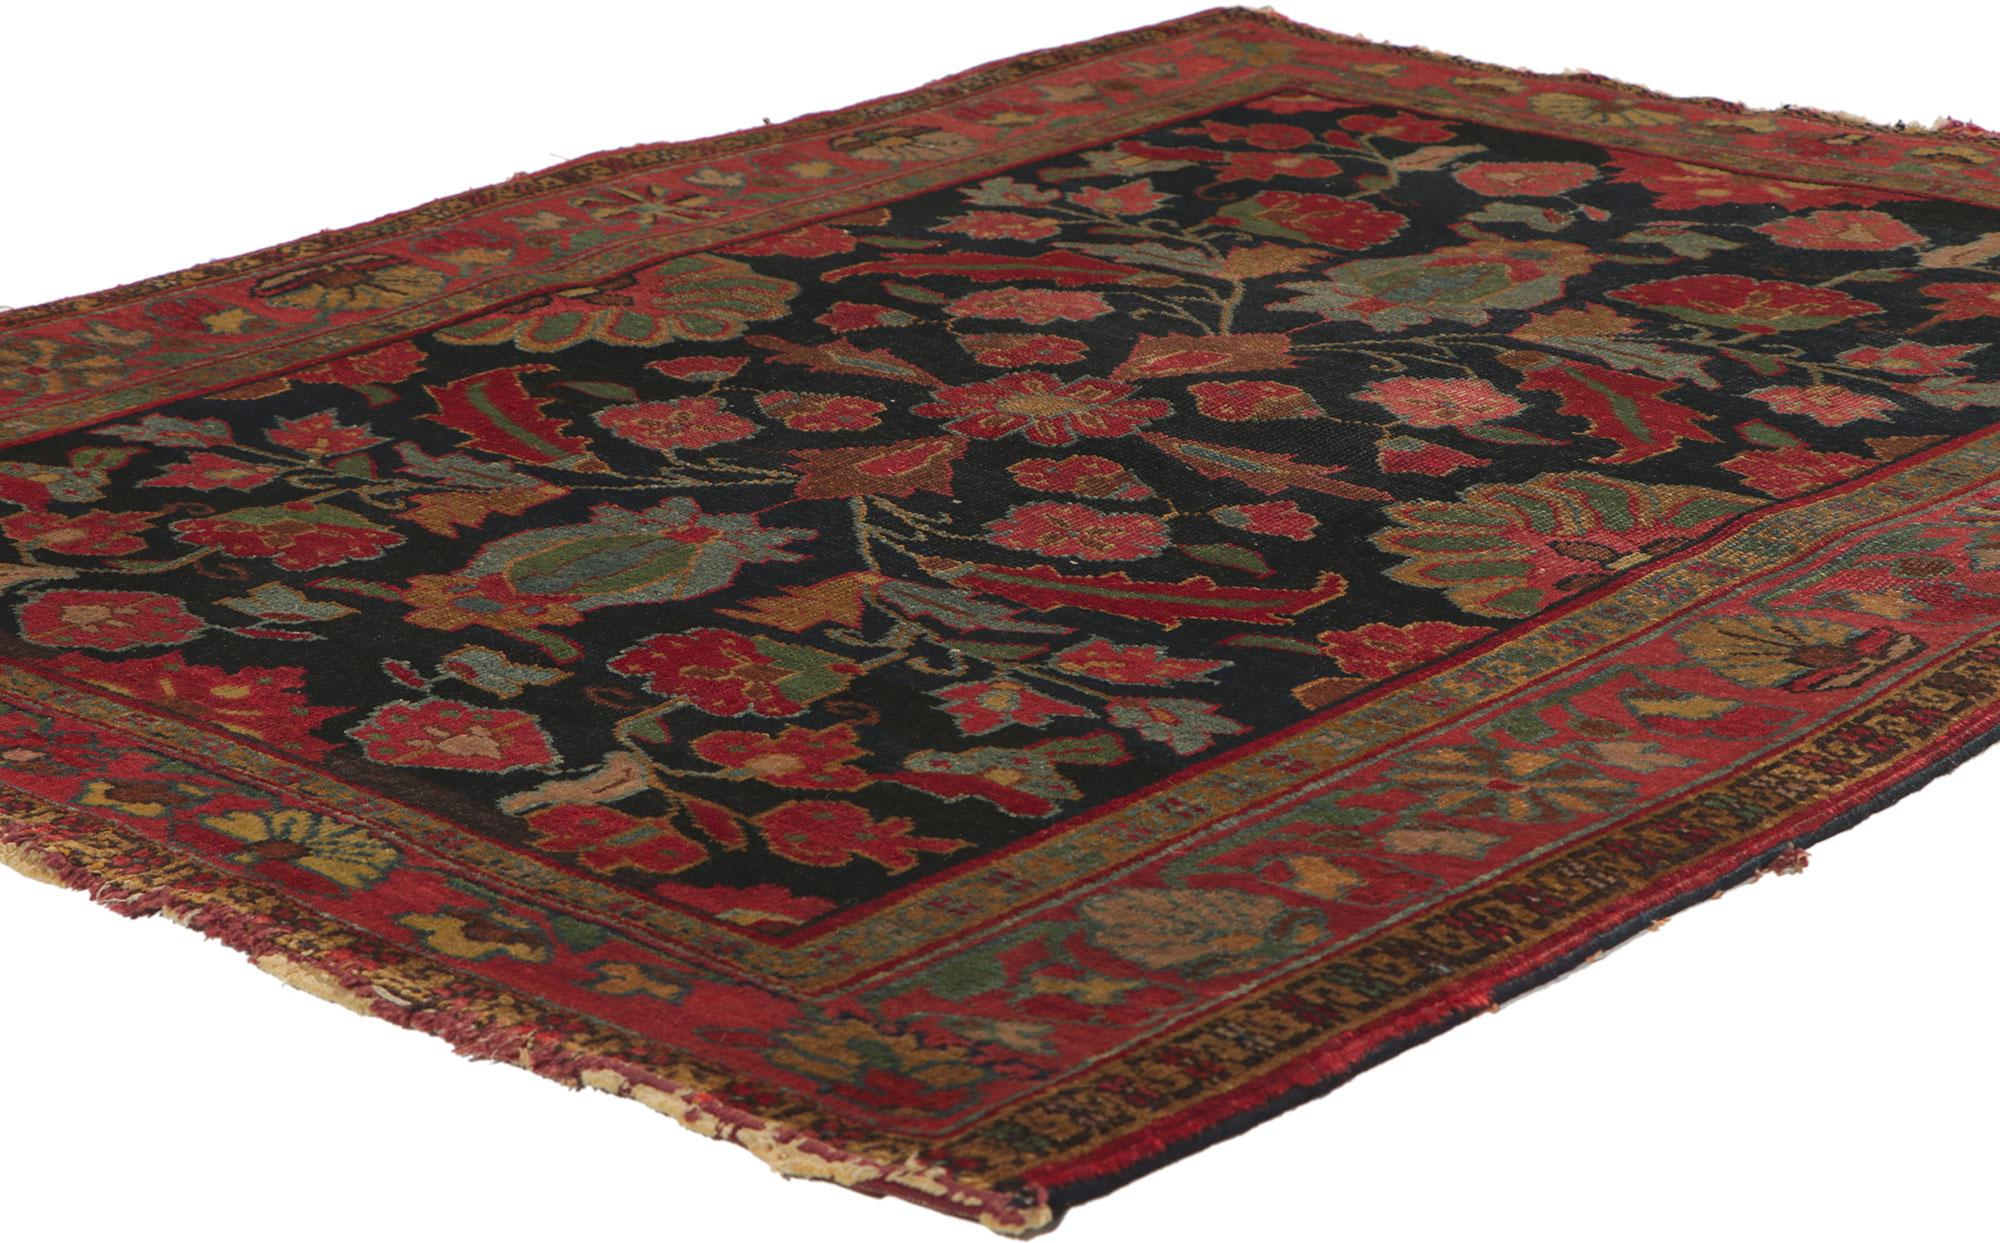 77597 distressed antique Persian Serapi rug, 03'06 x 04'04. Rendered in variegated shades of ink blue, red, navy blue, ruby red, brown, green, sky blue, berry, cerise, and tan with other accent colors.
Distressed. Desirable age wear.
Abrash.
Made